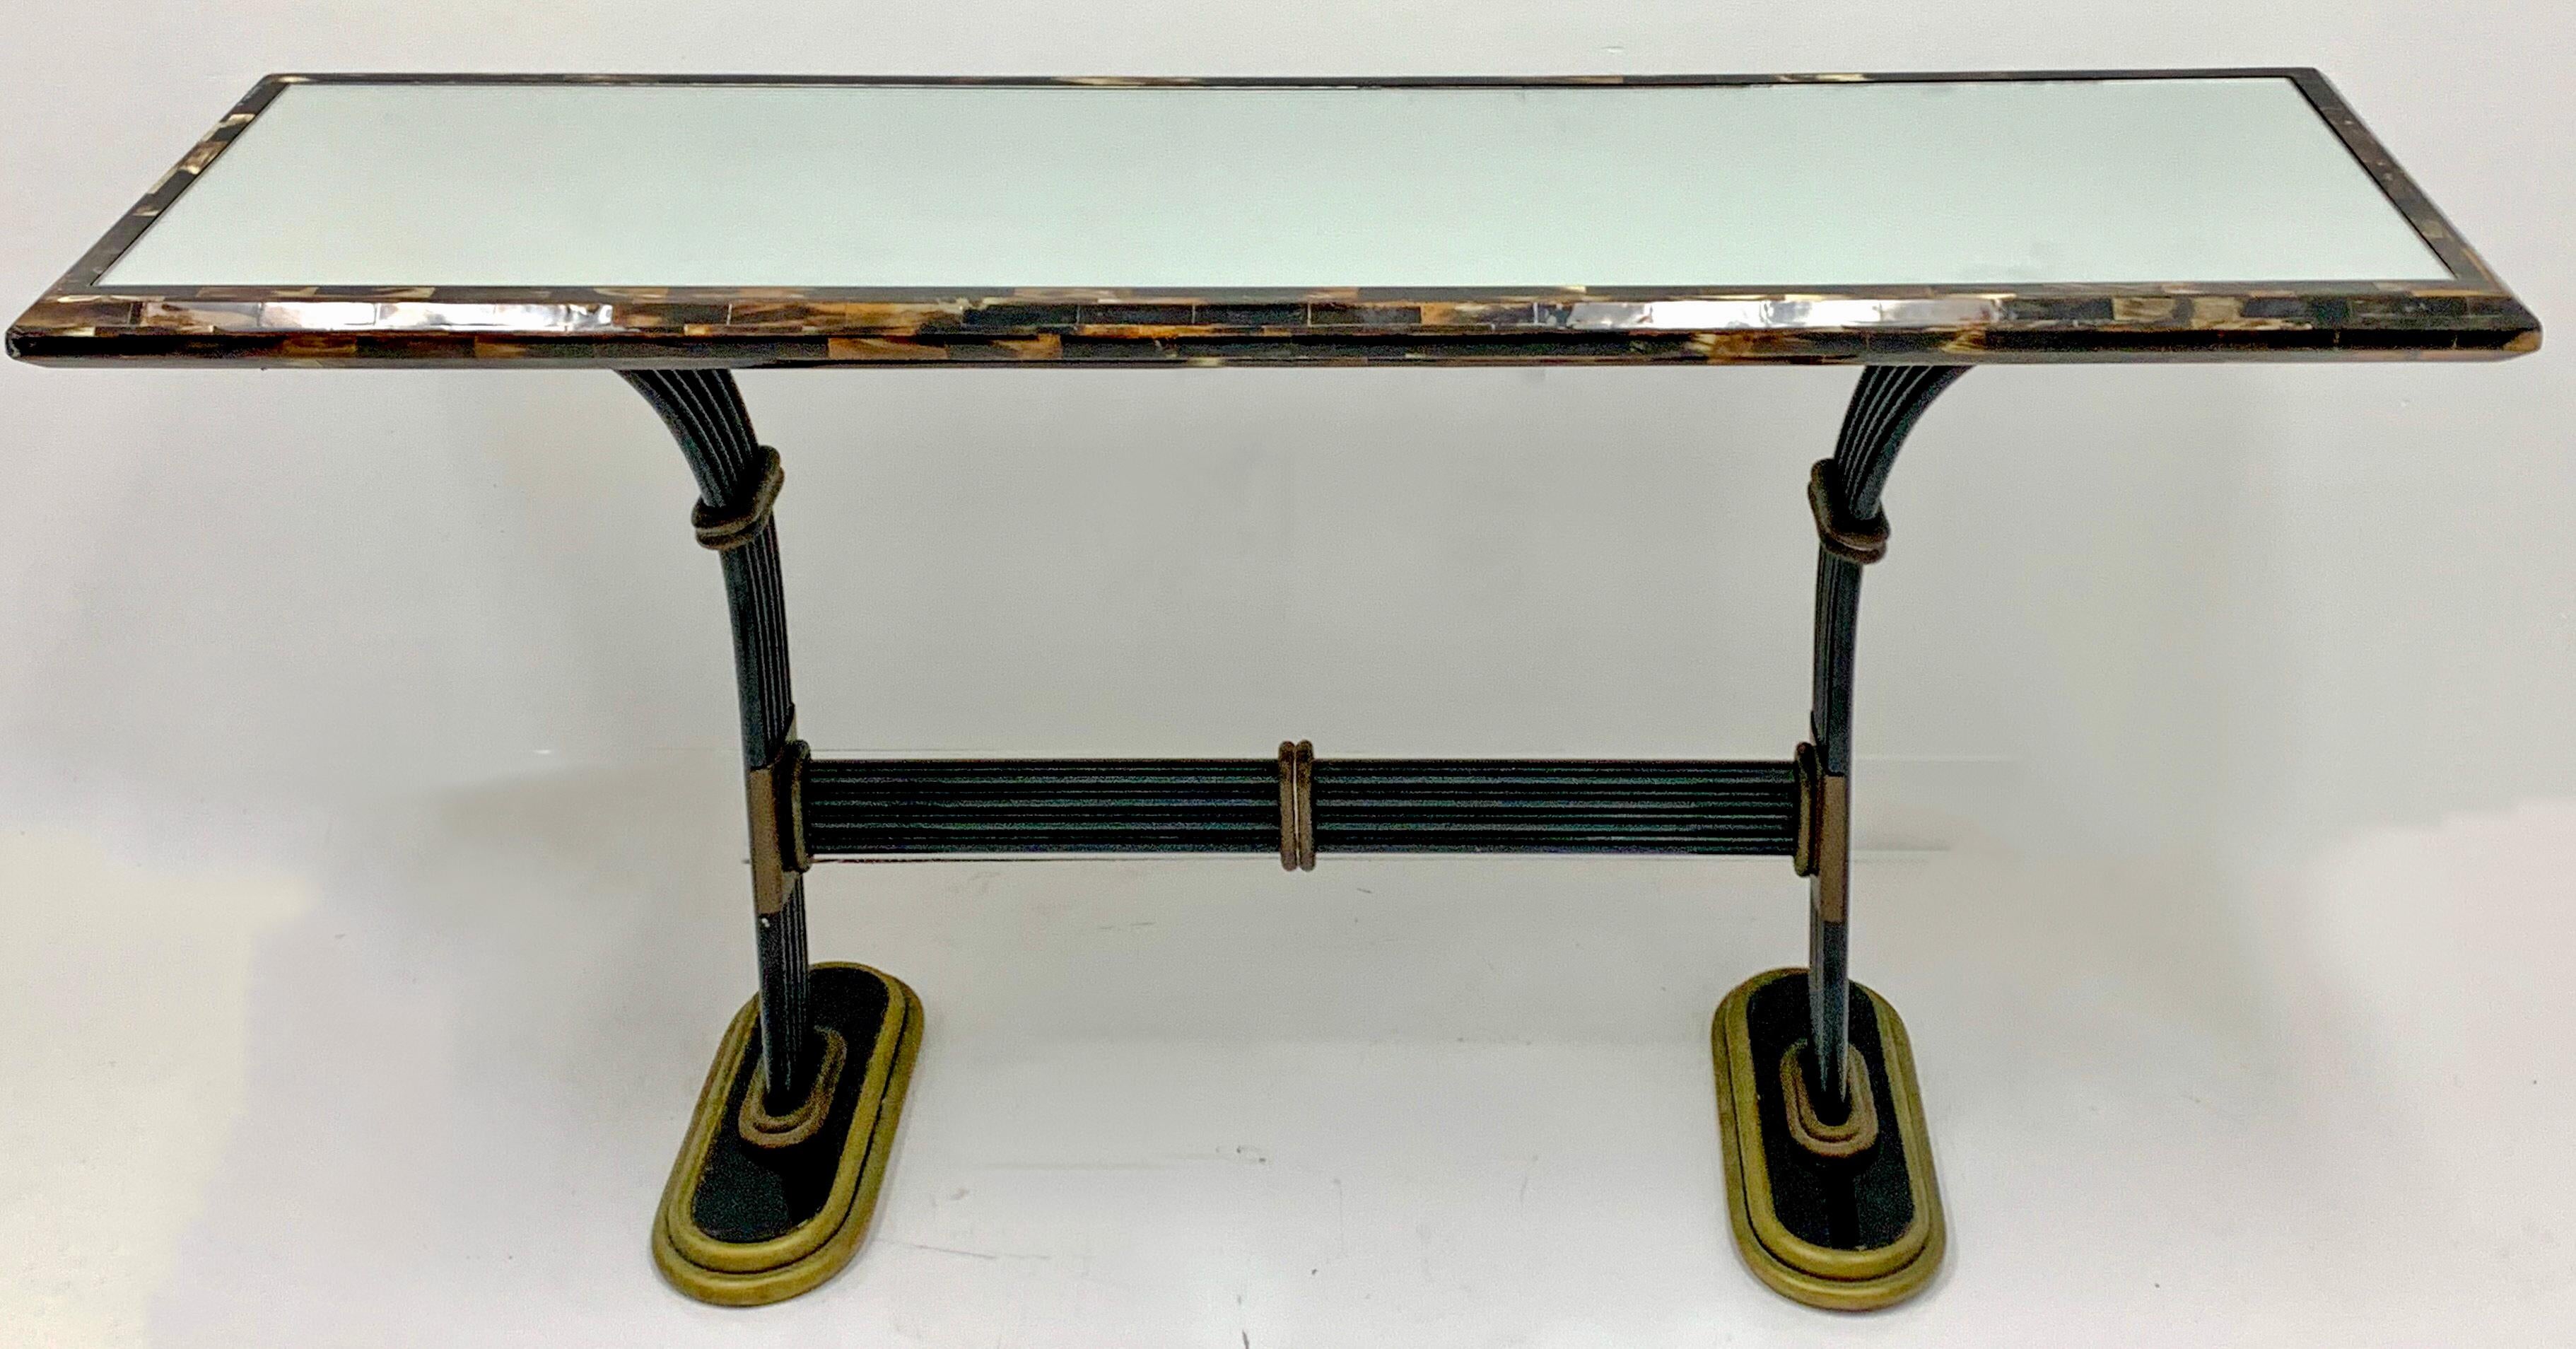 This is a 20th century Maitland-Smith mirrored console table with tessellated horn frame and cast bronze accents. It is marked and in very good condition.